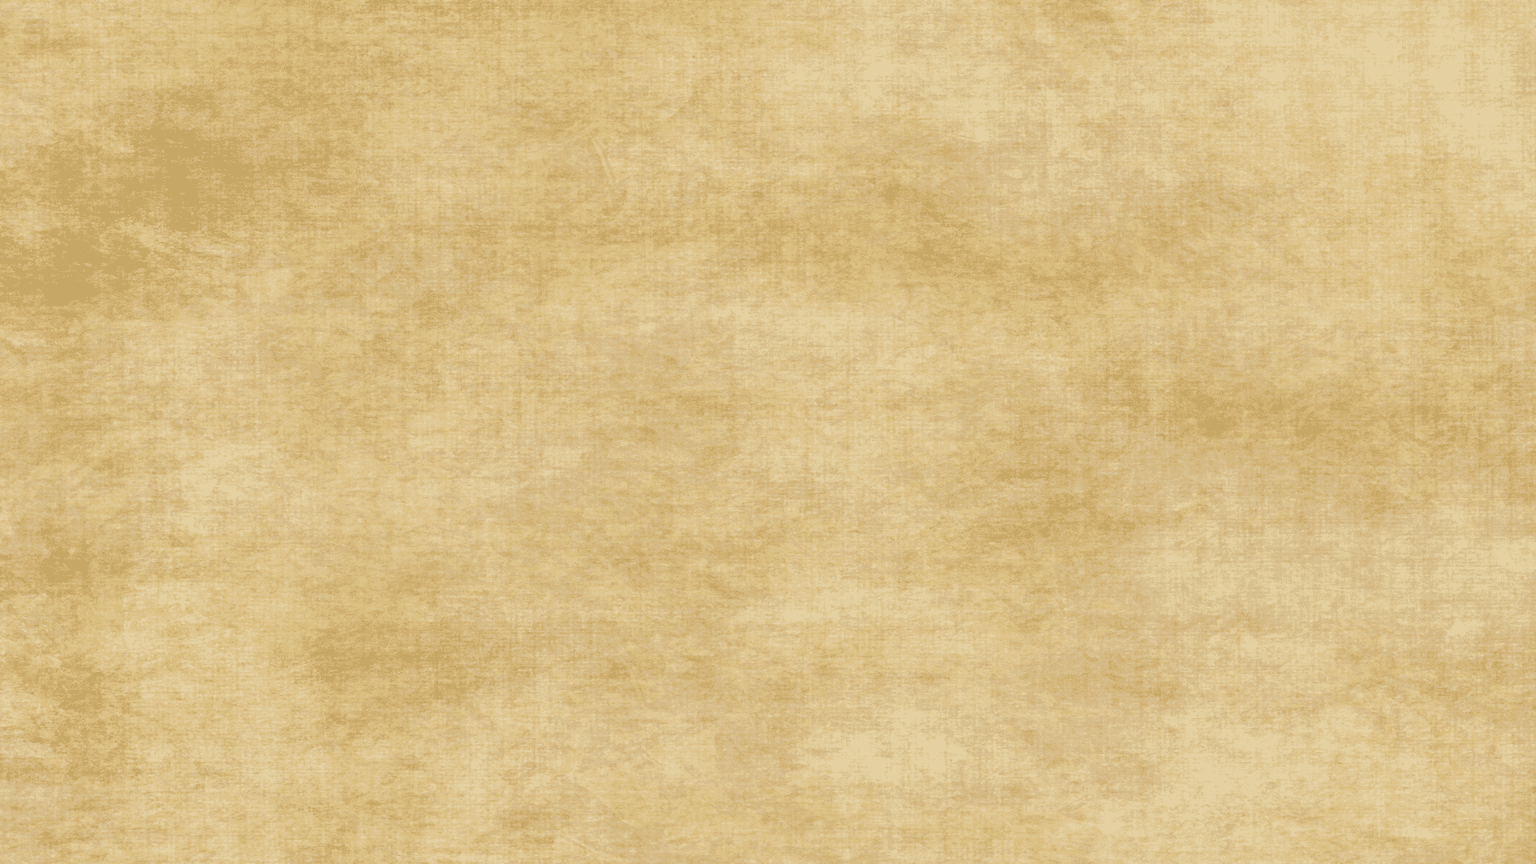 A Beige Background With A Rough Texture